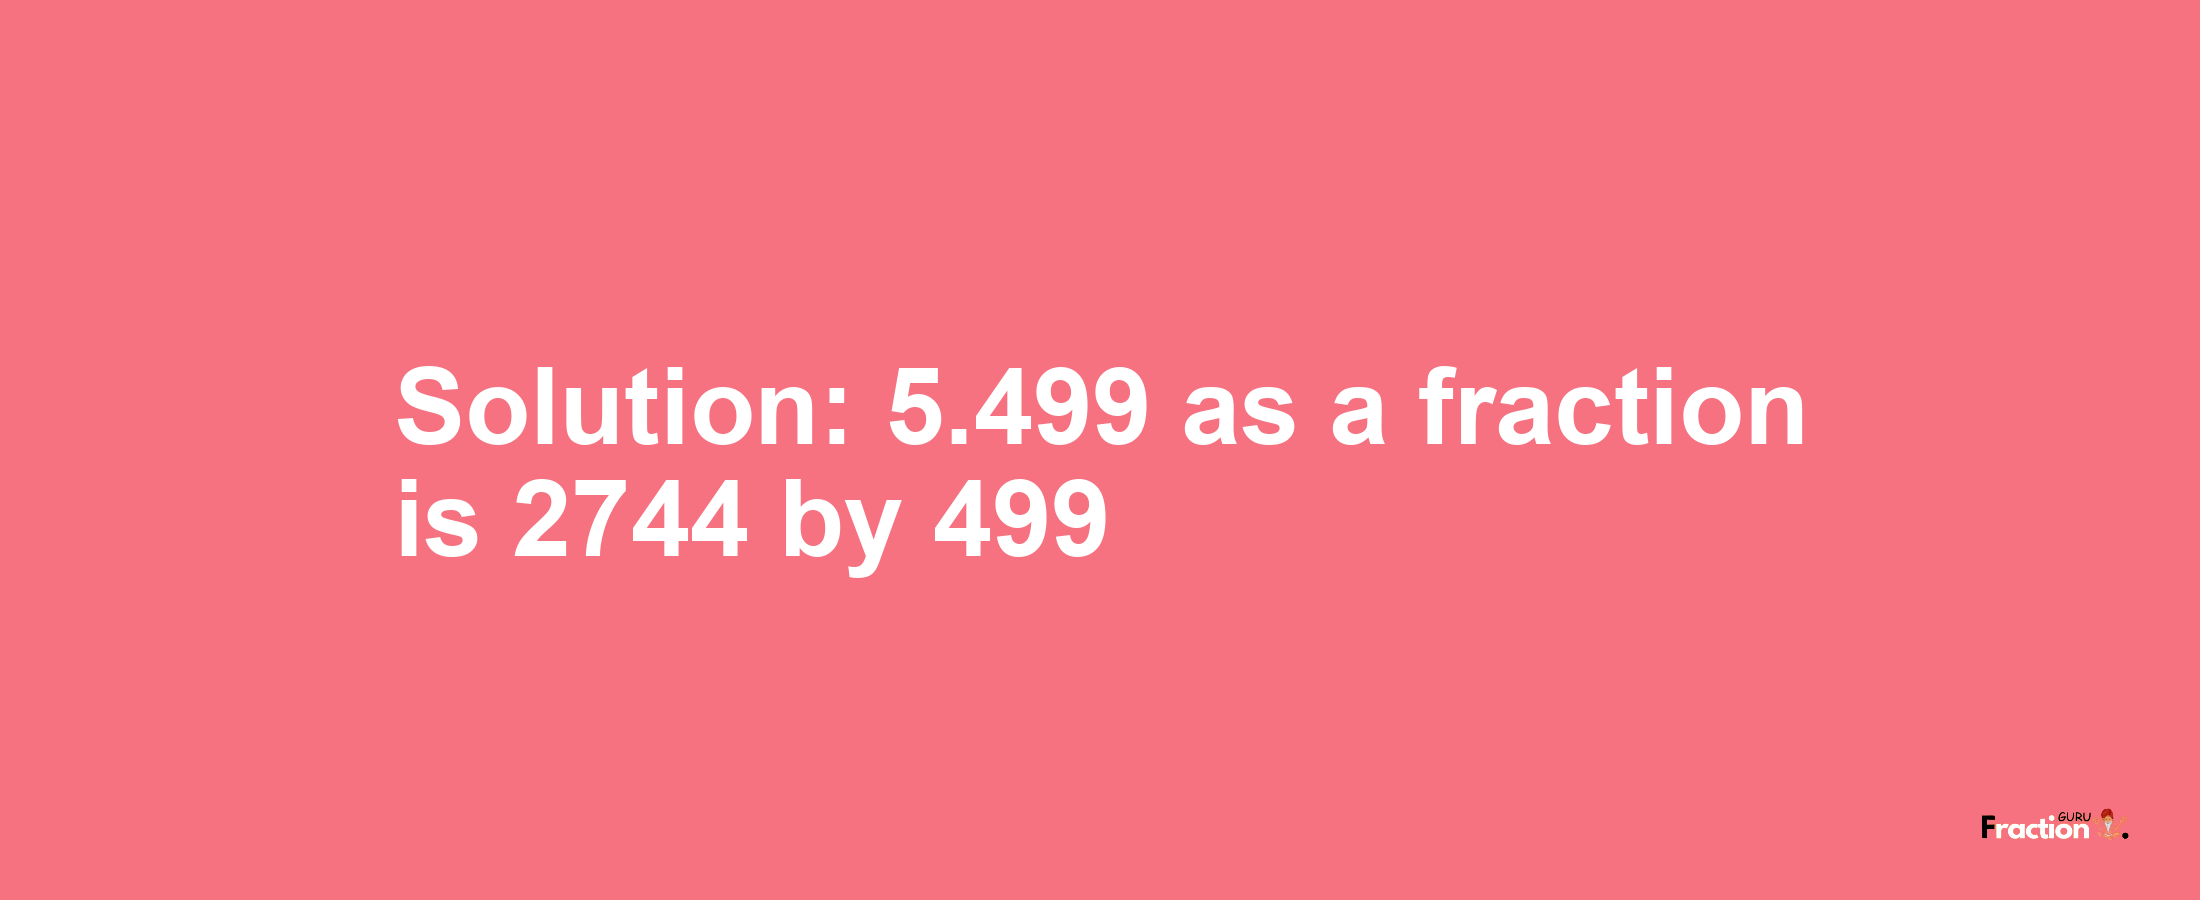 Solution:5.499 as a fraction is 2744/499